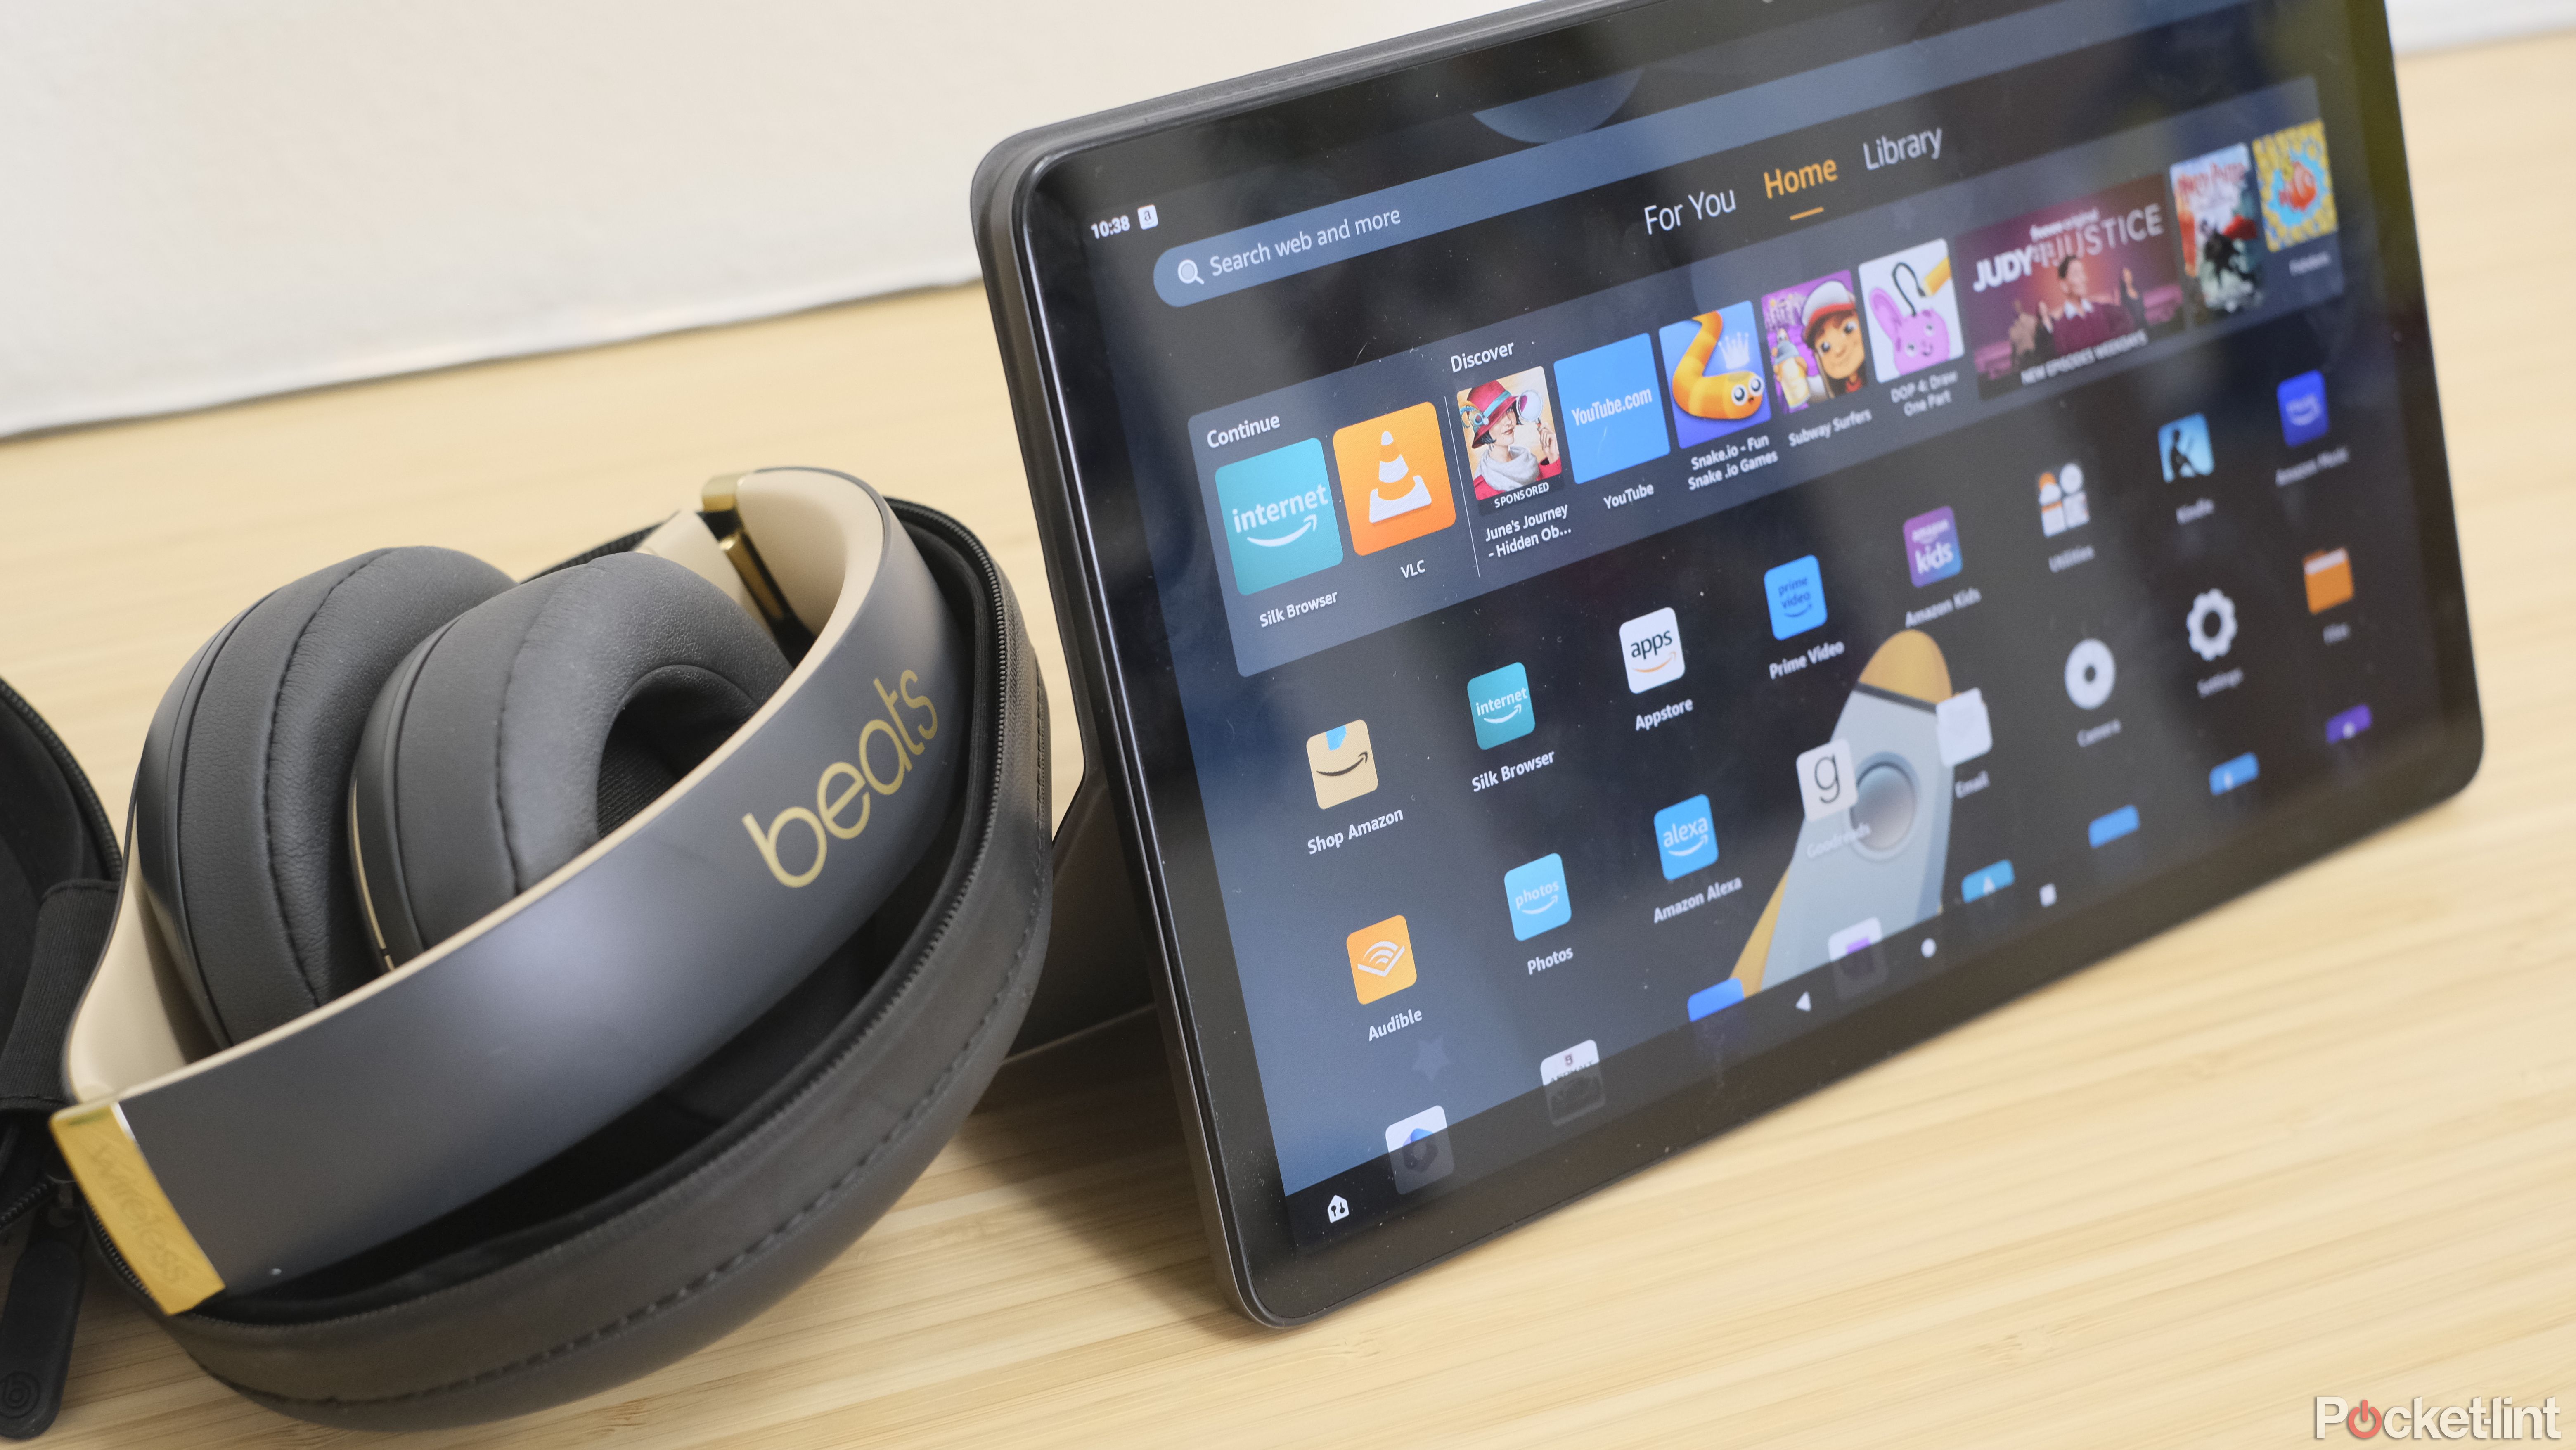 Paring Beats over-ears to Amazon Fire Tablet